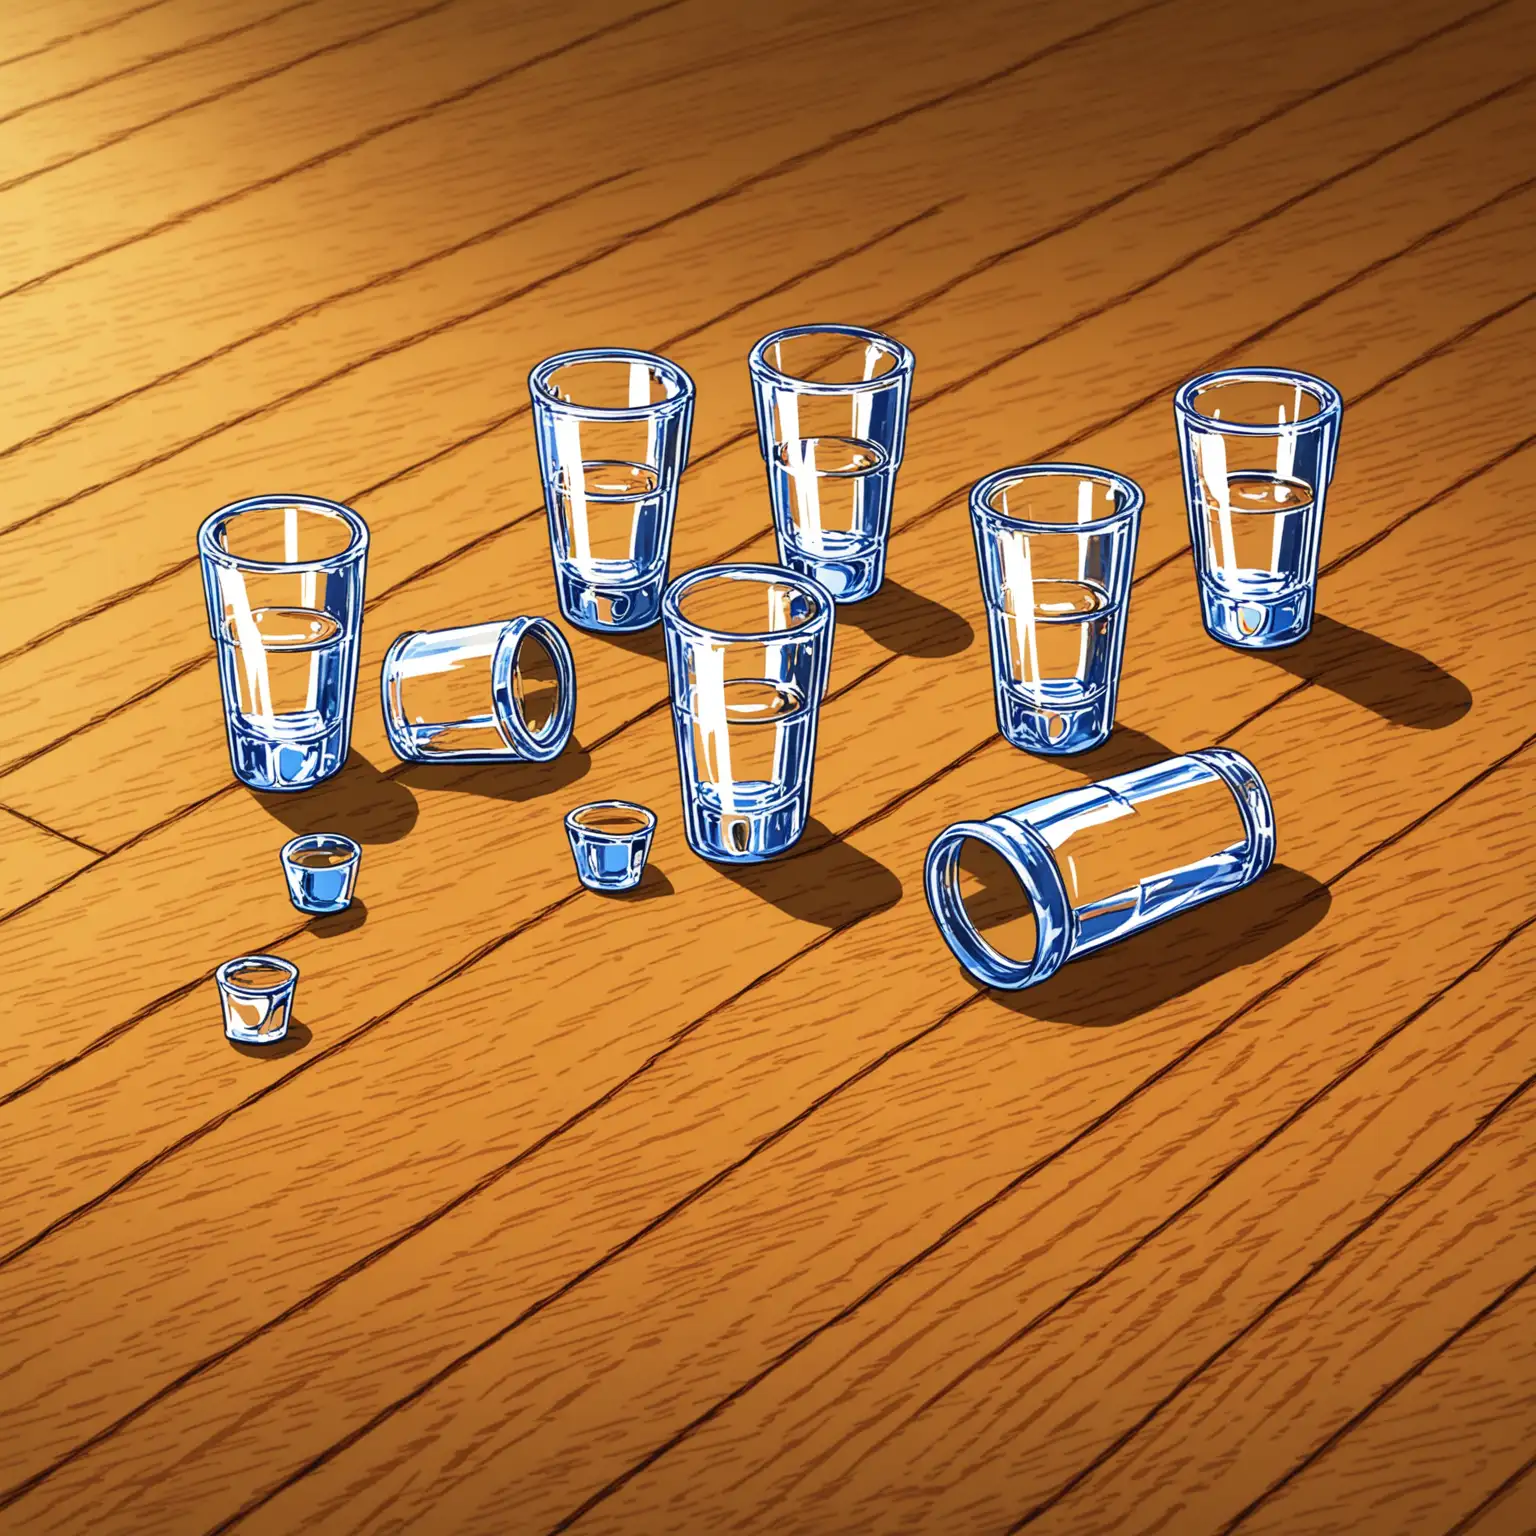 side view of a cartoon of 4 shot glasses scattered on a wood floor